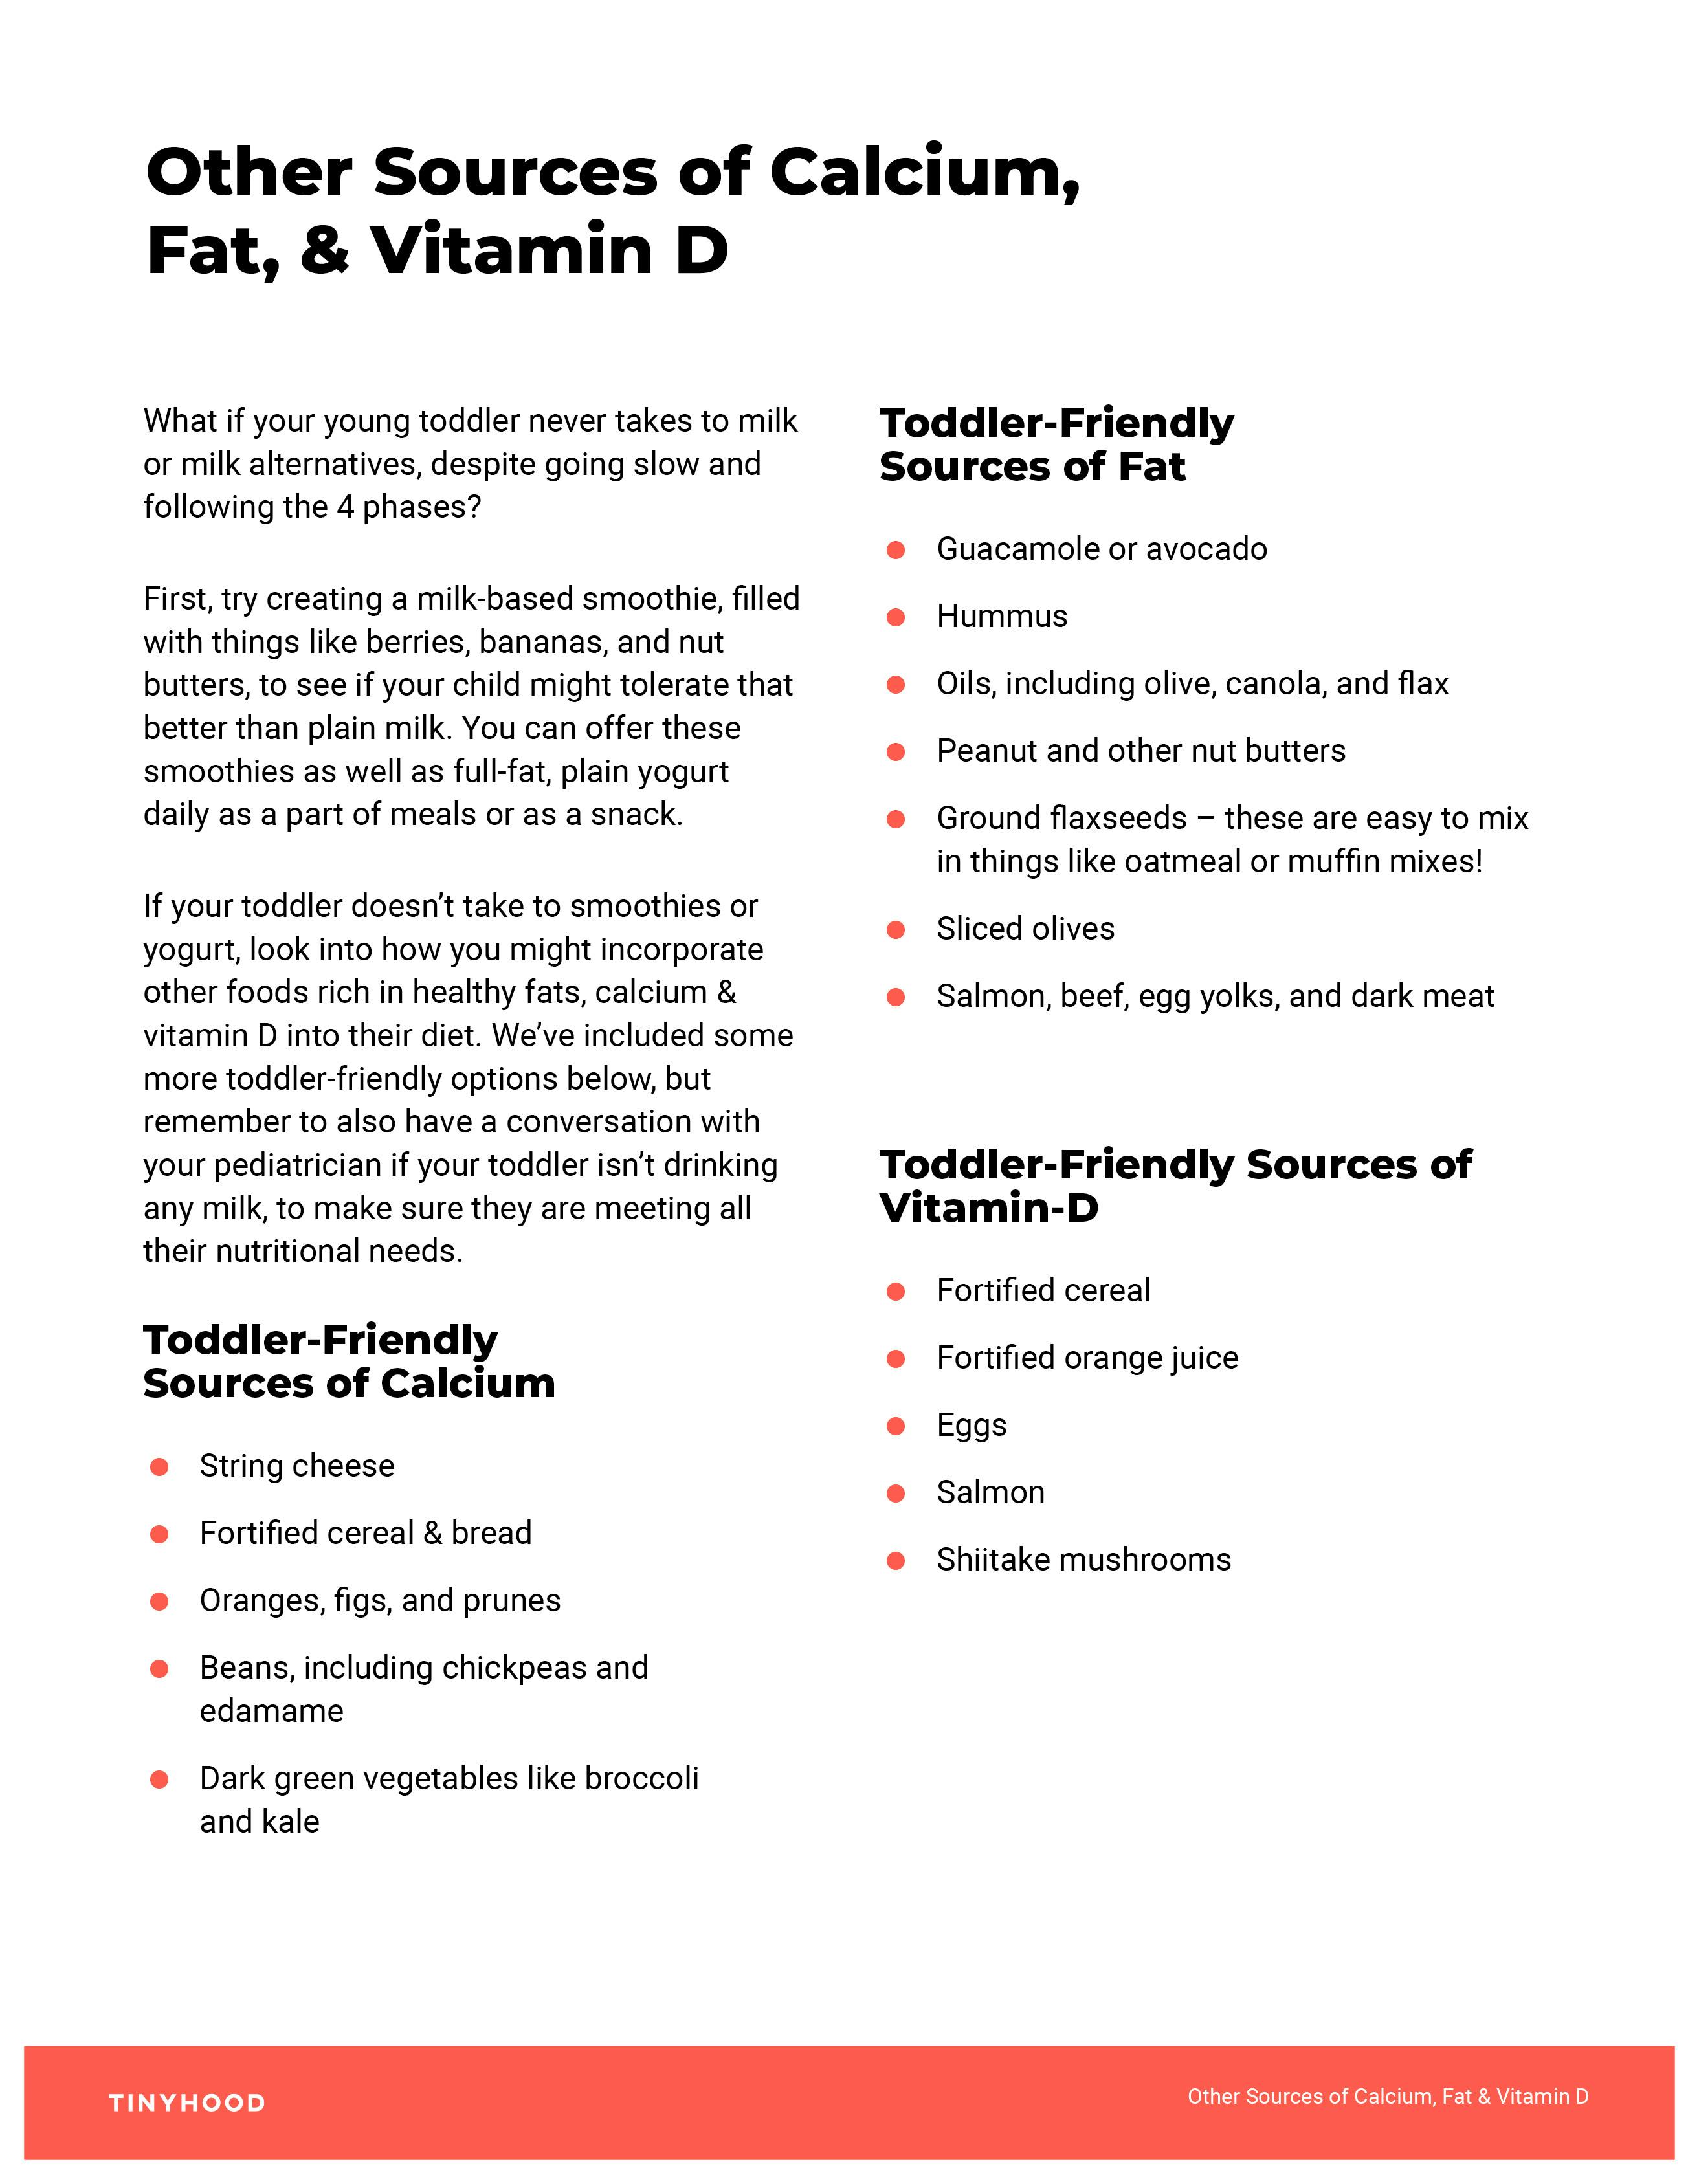 Preview image of Handout: Other Sources of Calcium, Fat & Vitamin D